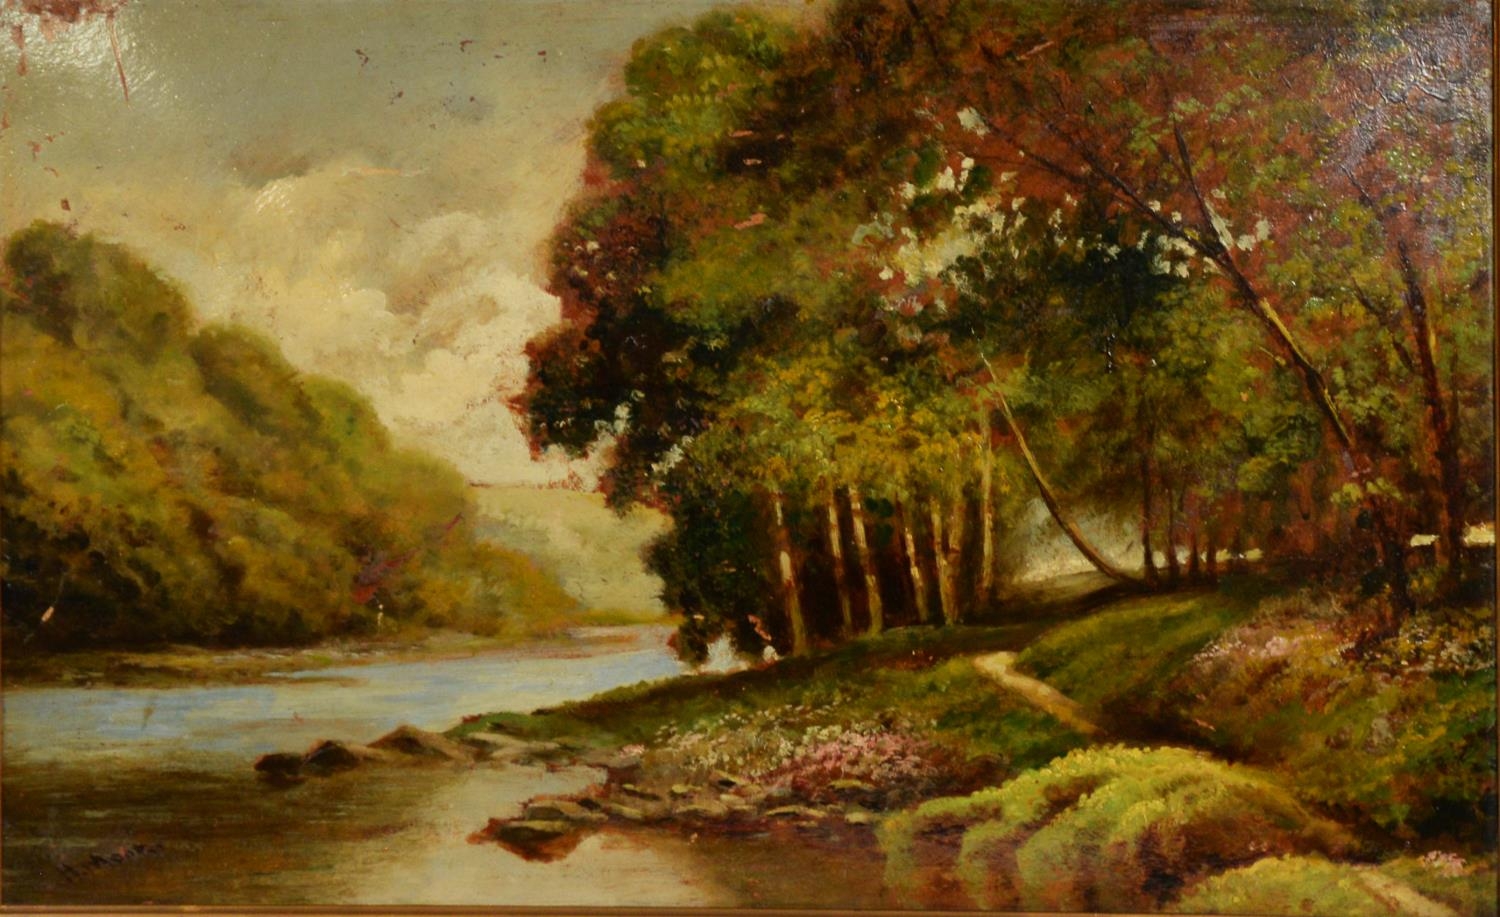 19th CENTURY ENGLISH SCHOOL PAIR OF OILS ON CANVAS Landscapes 15 1/2in x 24 1/2in (39.3 x 62.2cm) - Image 3 of 12